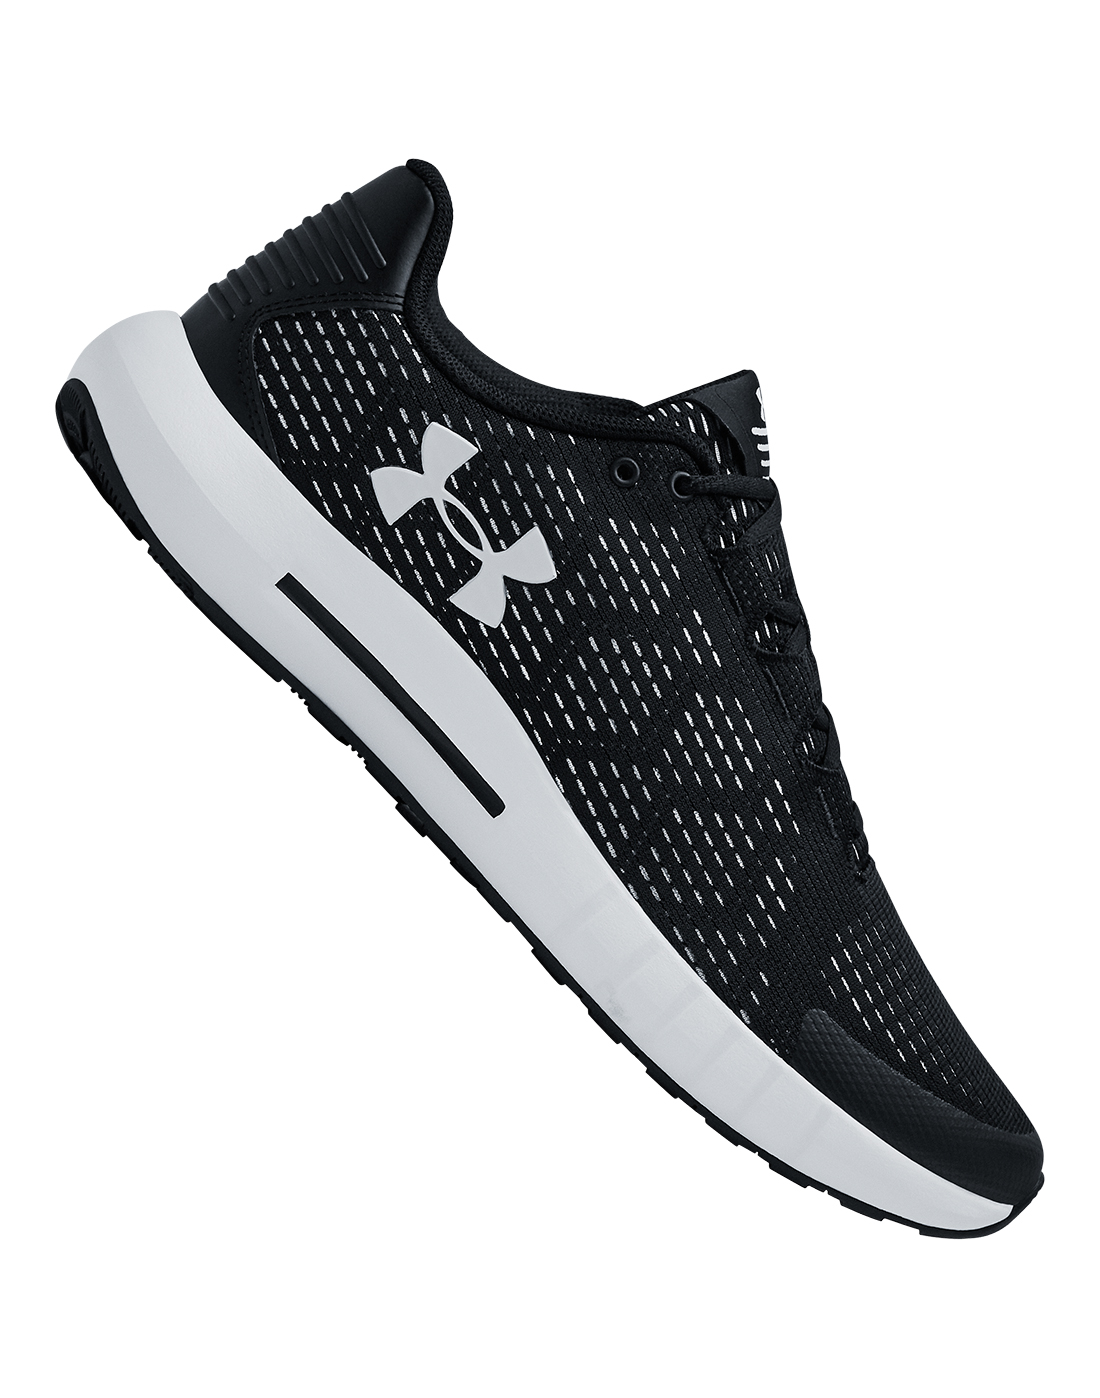 mens black under armour running shoes